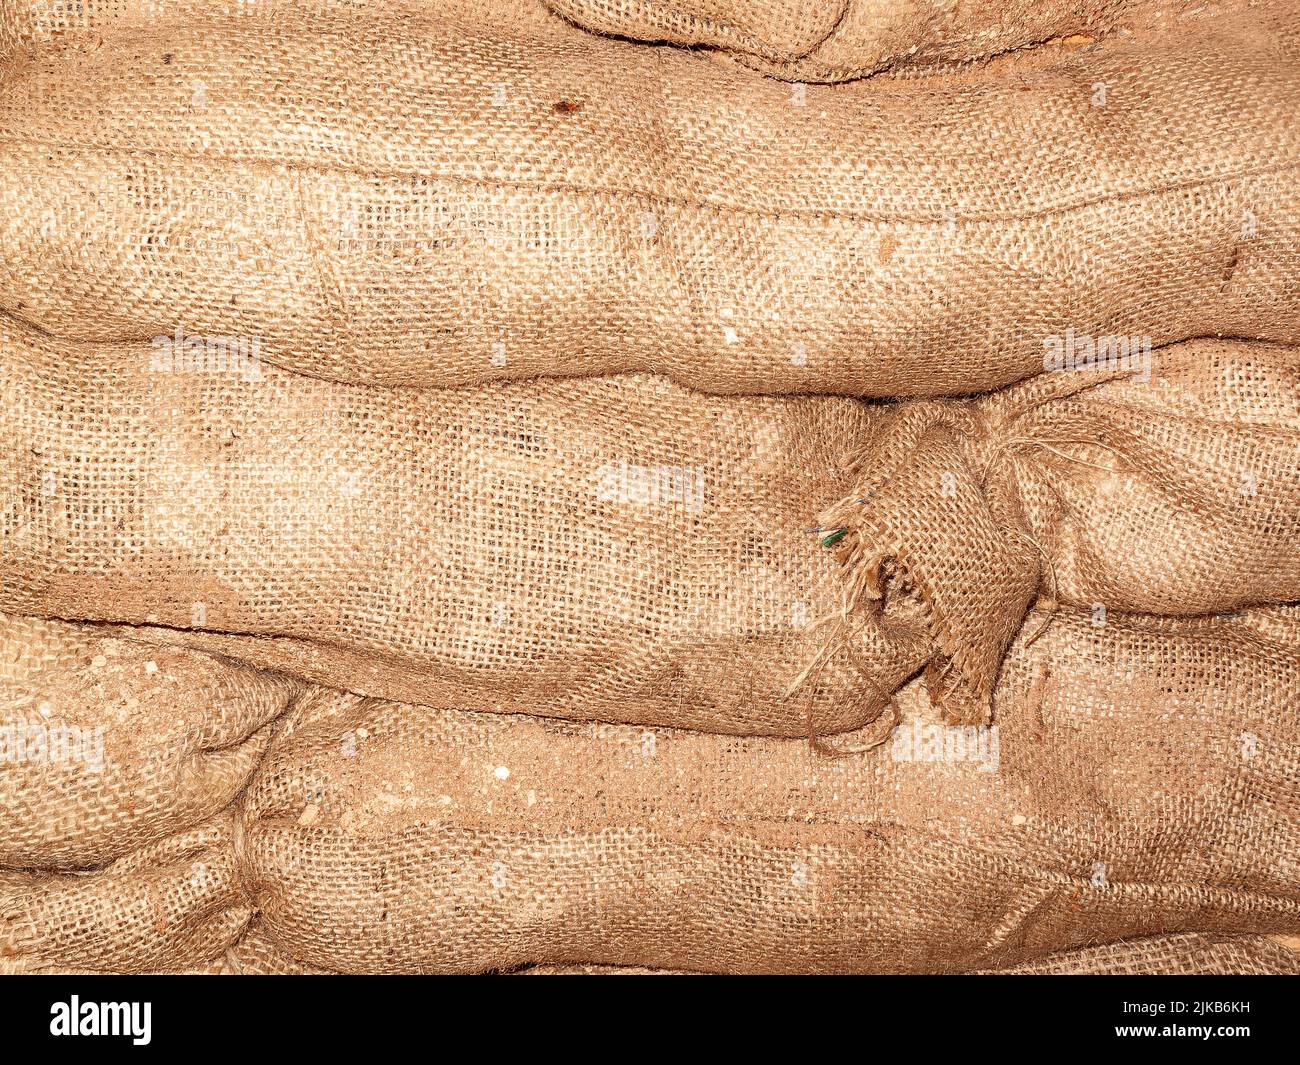 Sandbags background stacked in a heap for use as flood defence or for the military as a barricade, stock photo image Stock Photo